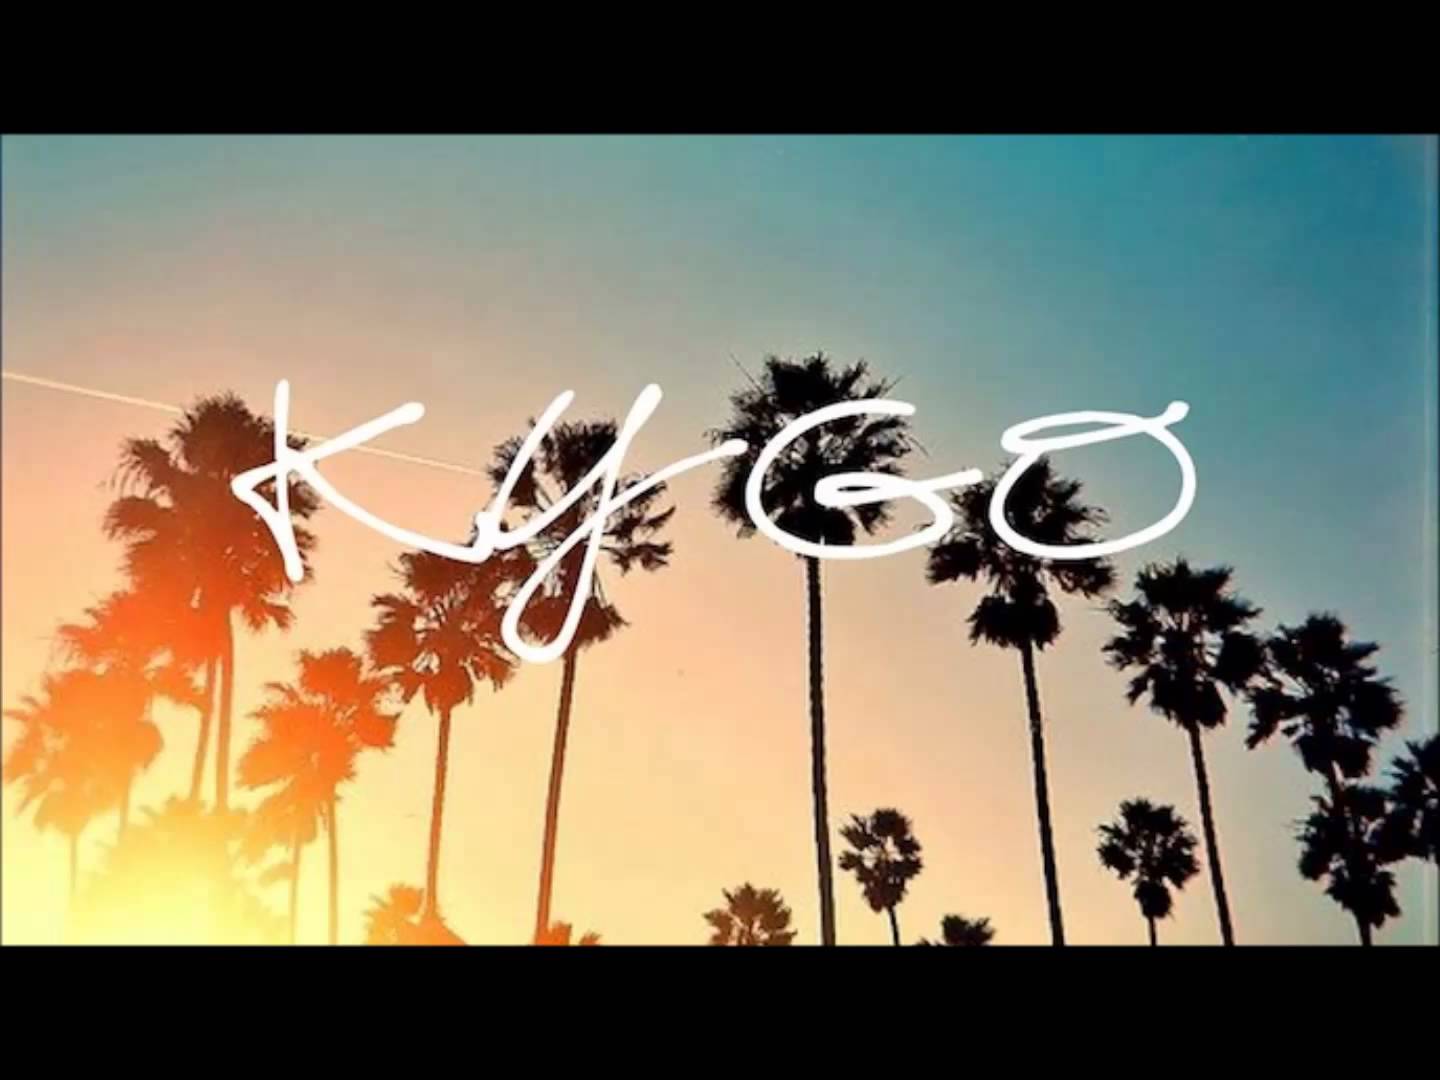 Songs in New Best Of Kygo Mix. Special Summer Mix